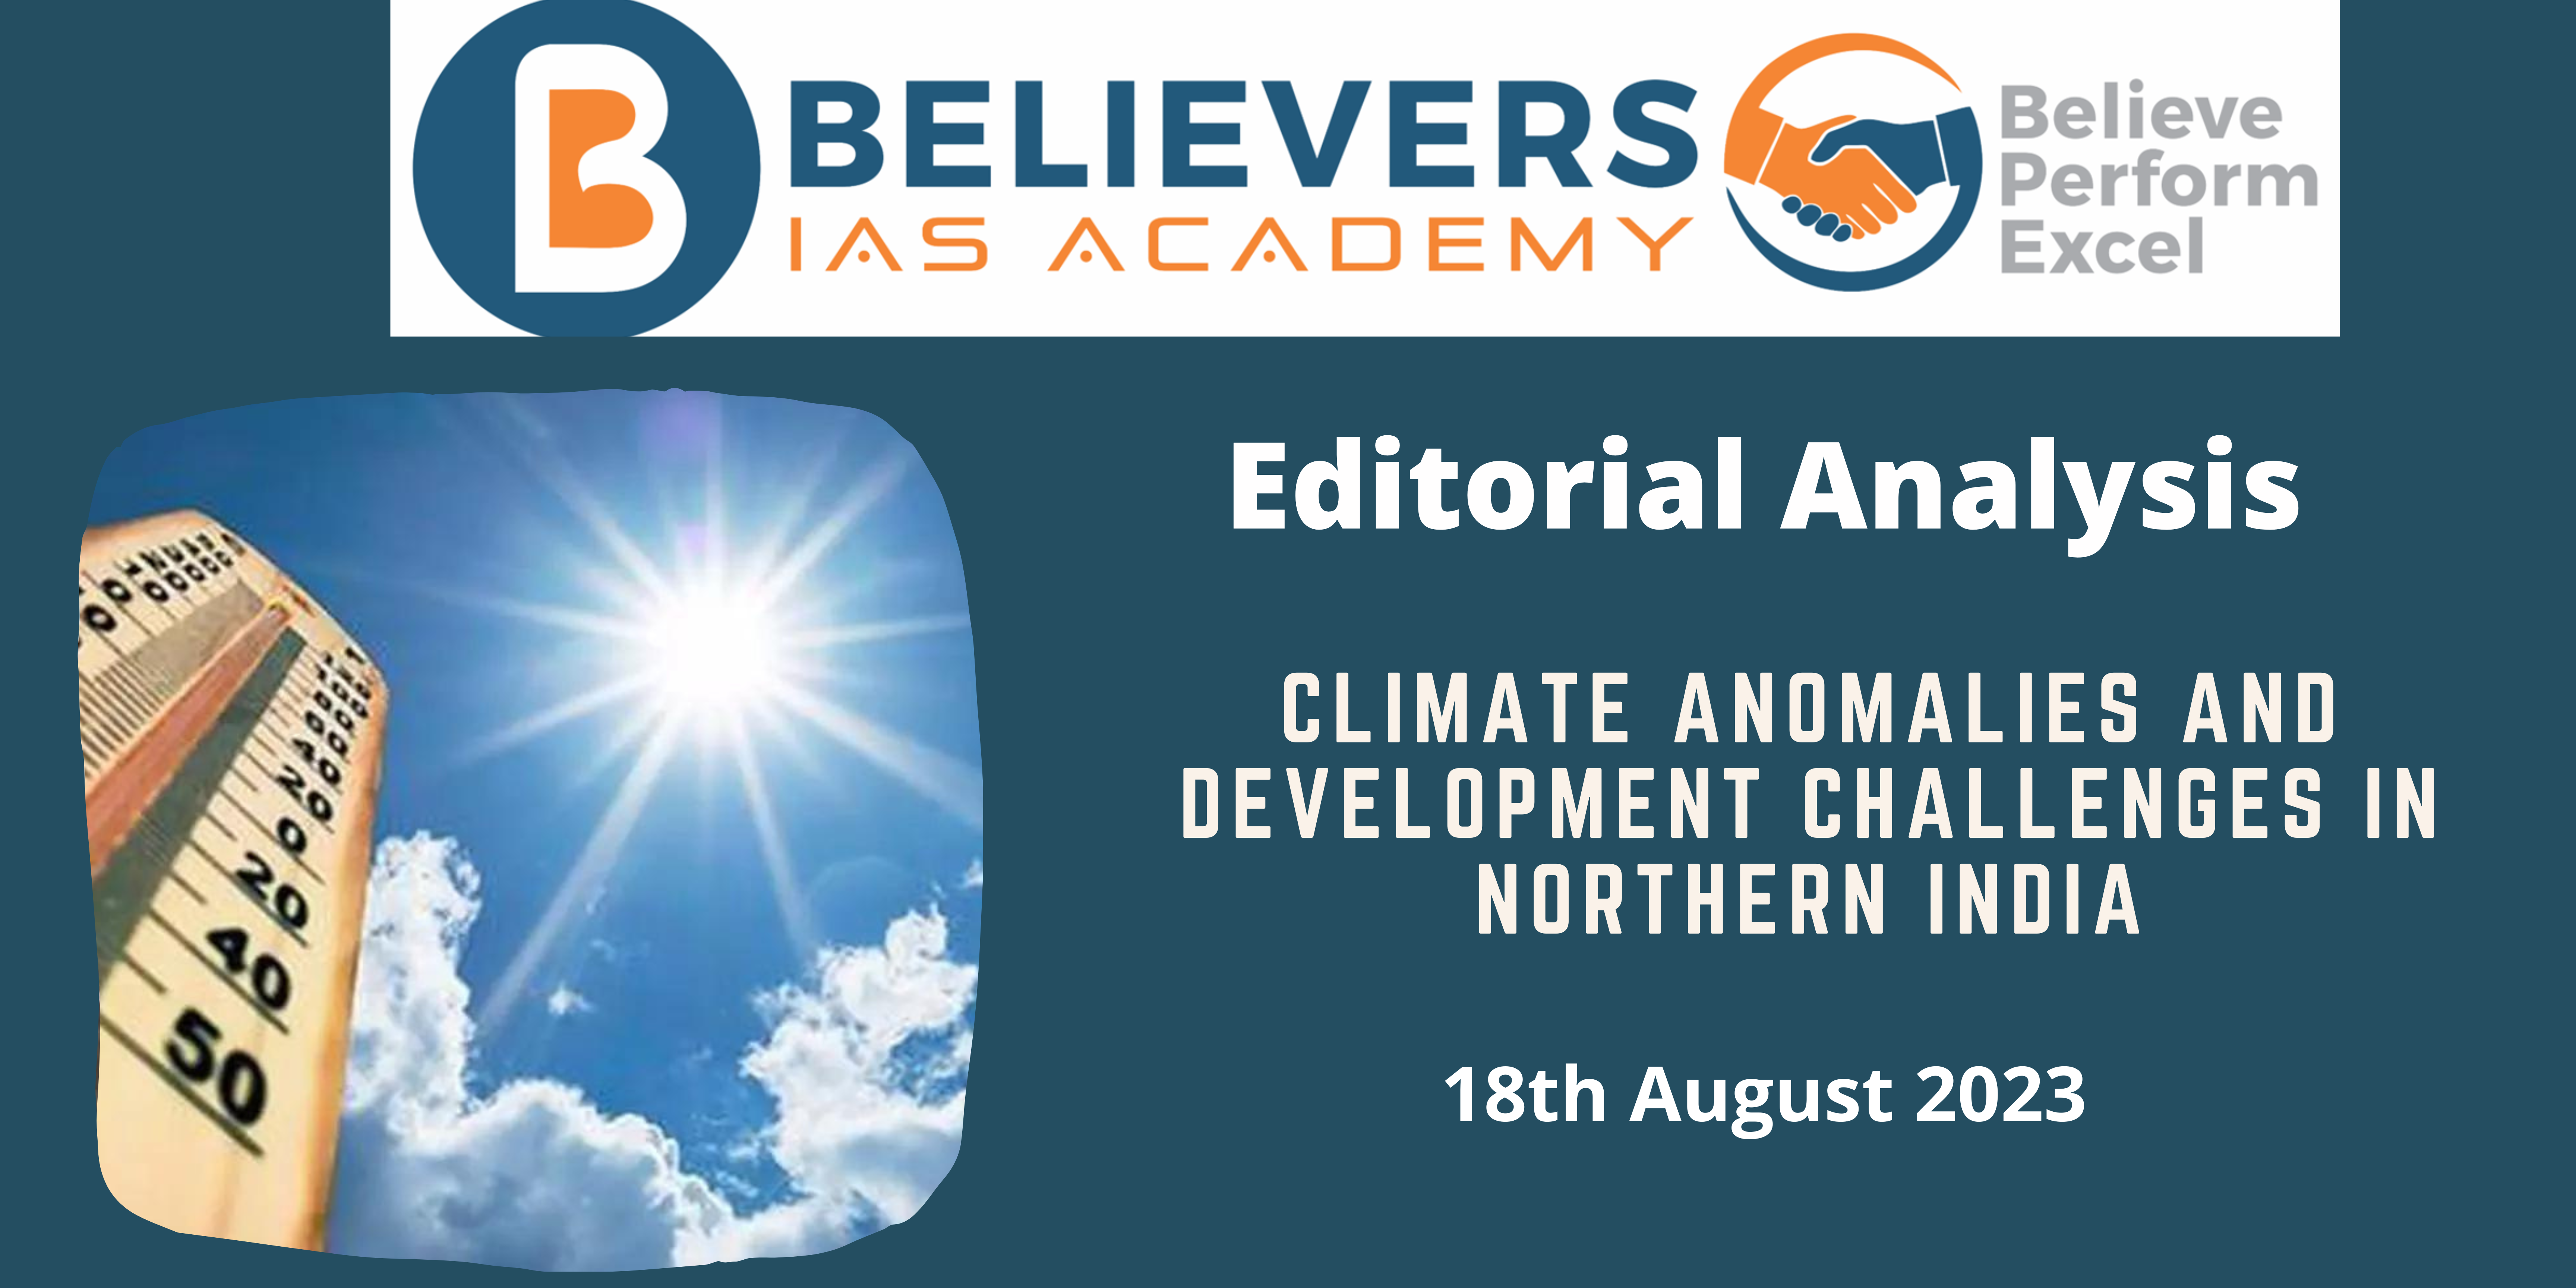 Climate Anomalies & Development Challenges in Northern India